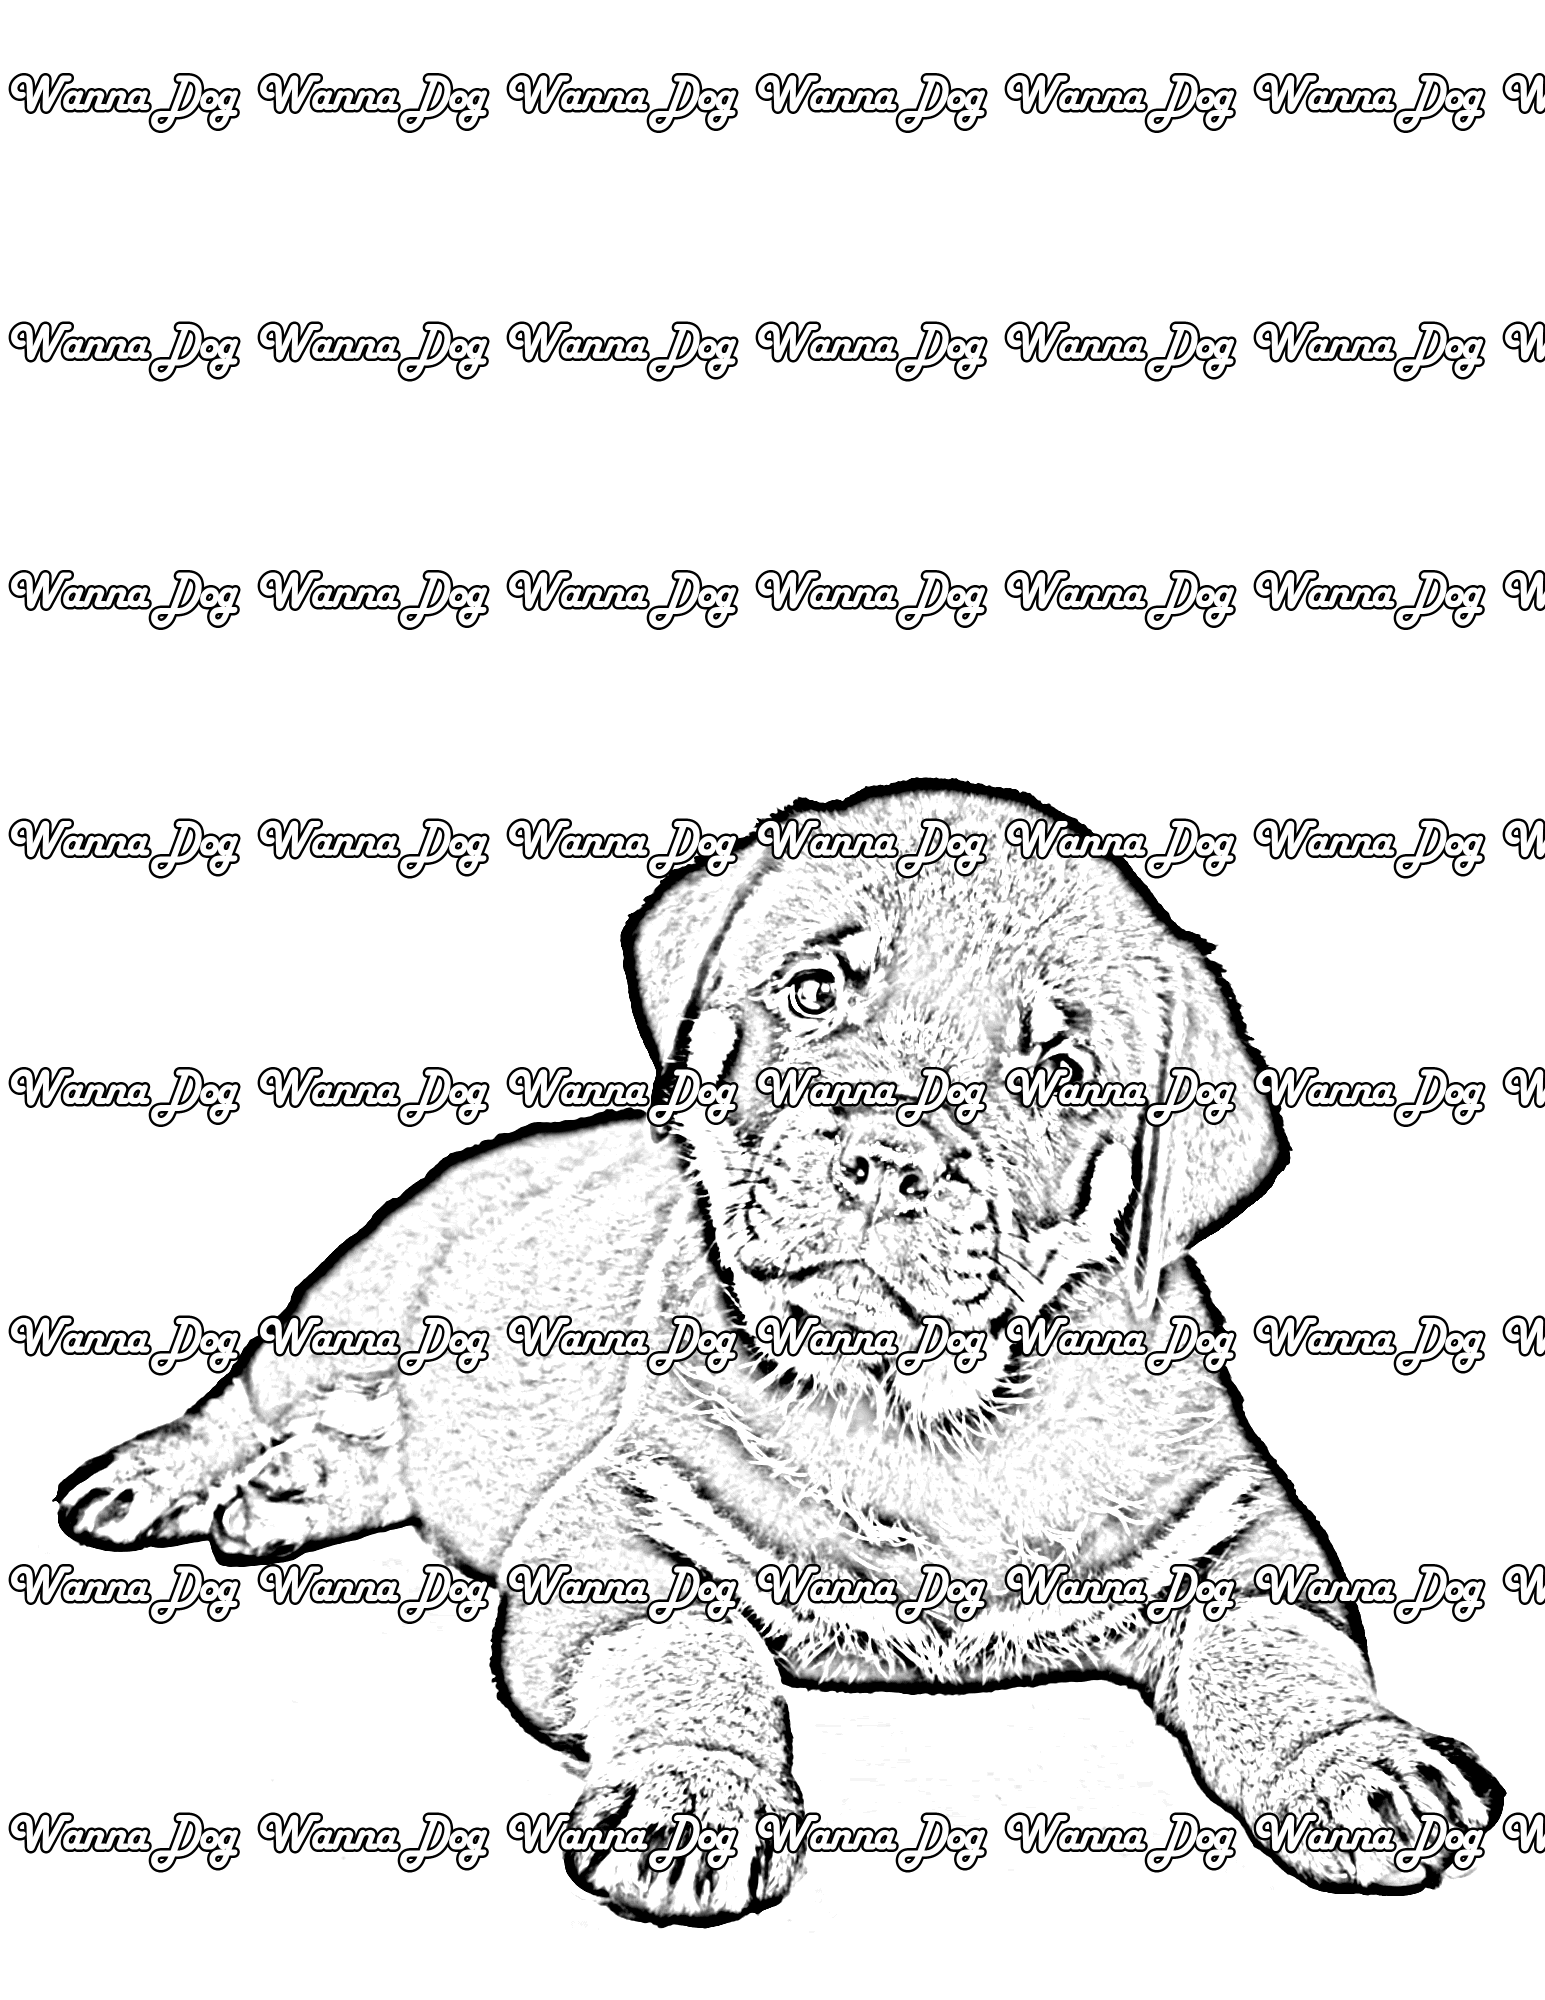 Rottweiler Puppy Coloring Page of a Rottweiler Puppy looking at the camera